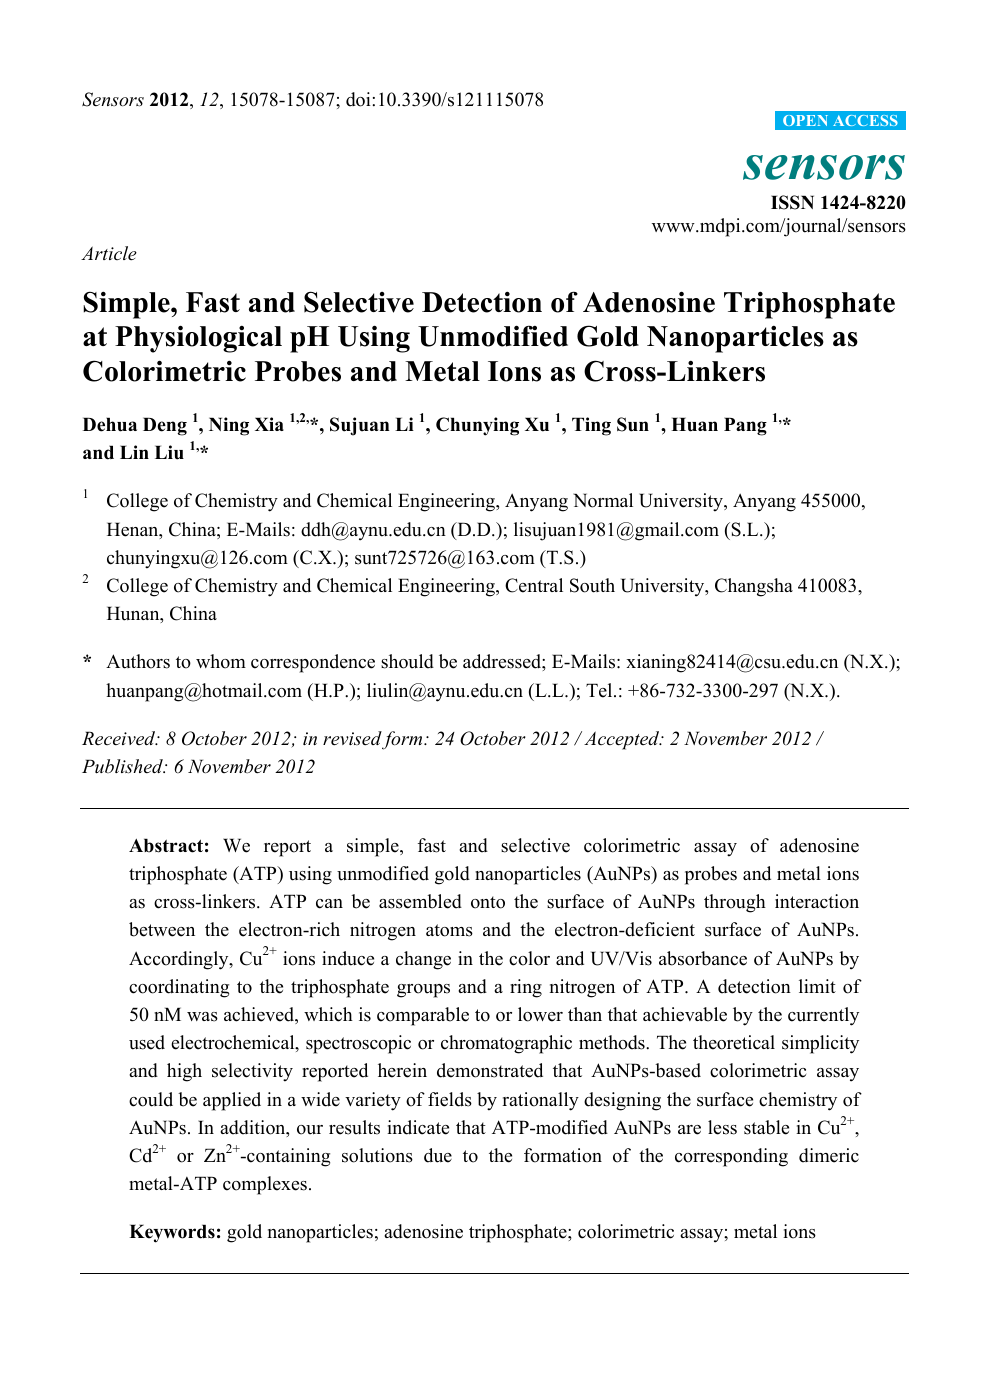 Simple Fast And Selective Detection Of Adenosine Triphosphate At Physiological Ph Using Unmodified Gold Nanoparticles As Colorimetric Probes And Metal Ions As Cross Linkers Topic Of Research Paper In Nano Technology Download Scholarly